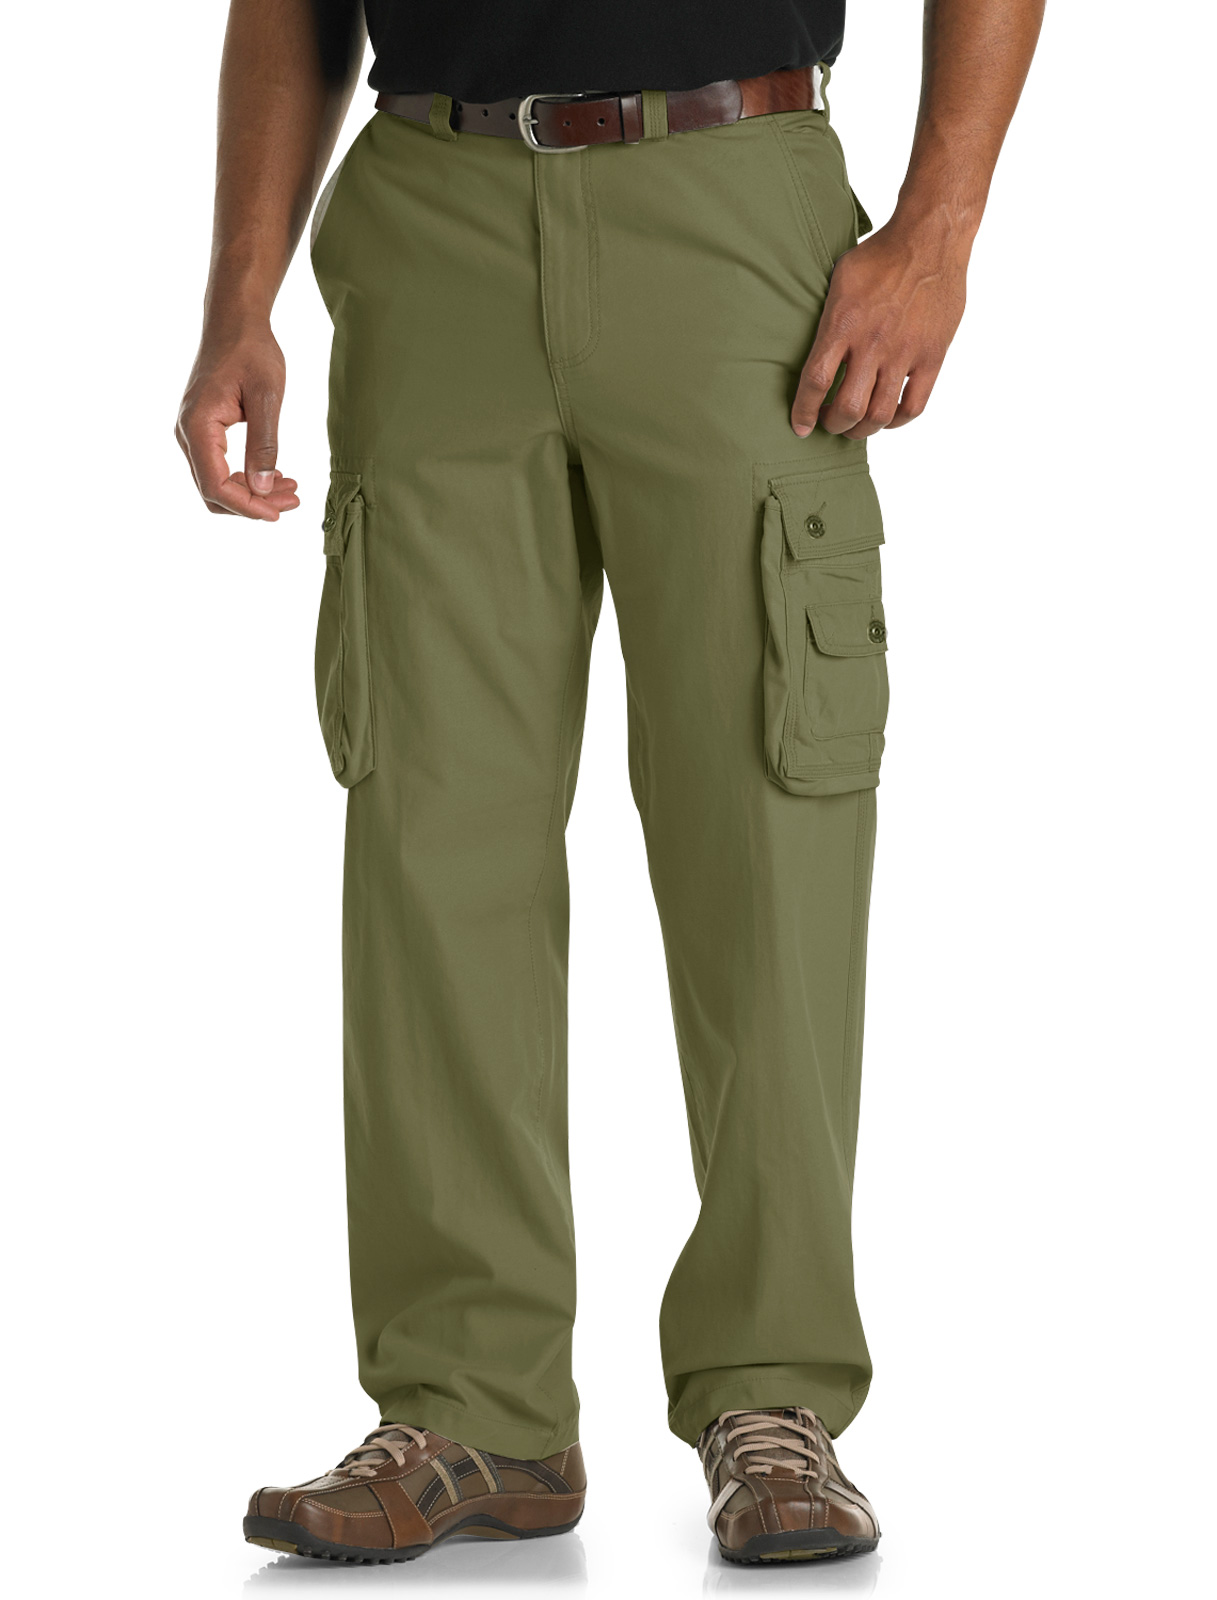 True Nation Men's Big and Tall Bellowed Cargo Pants